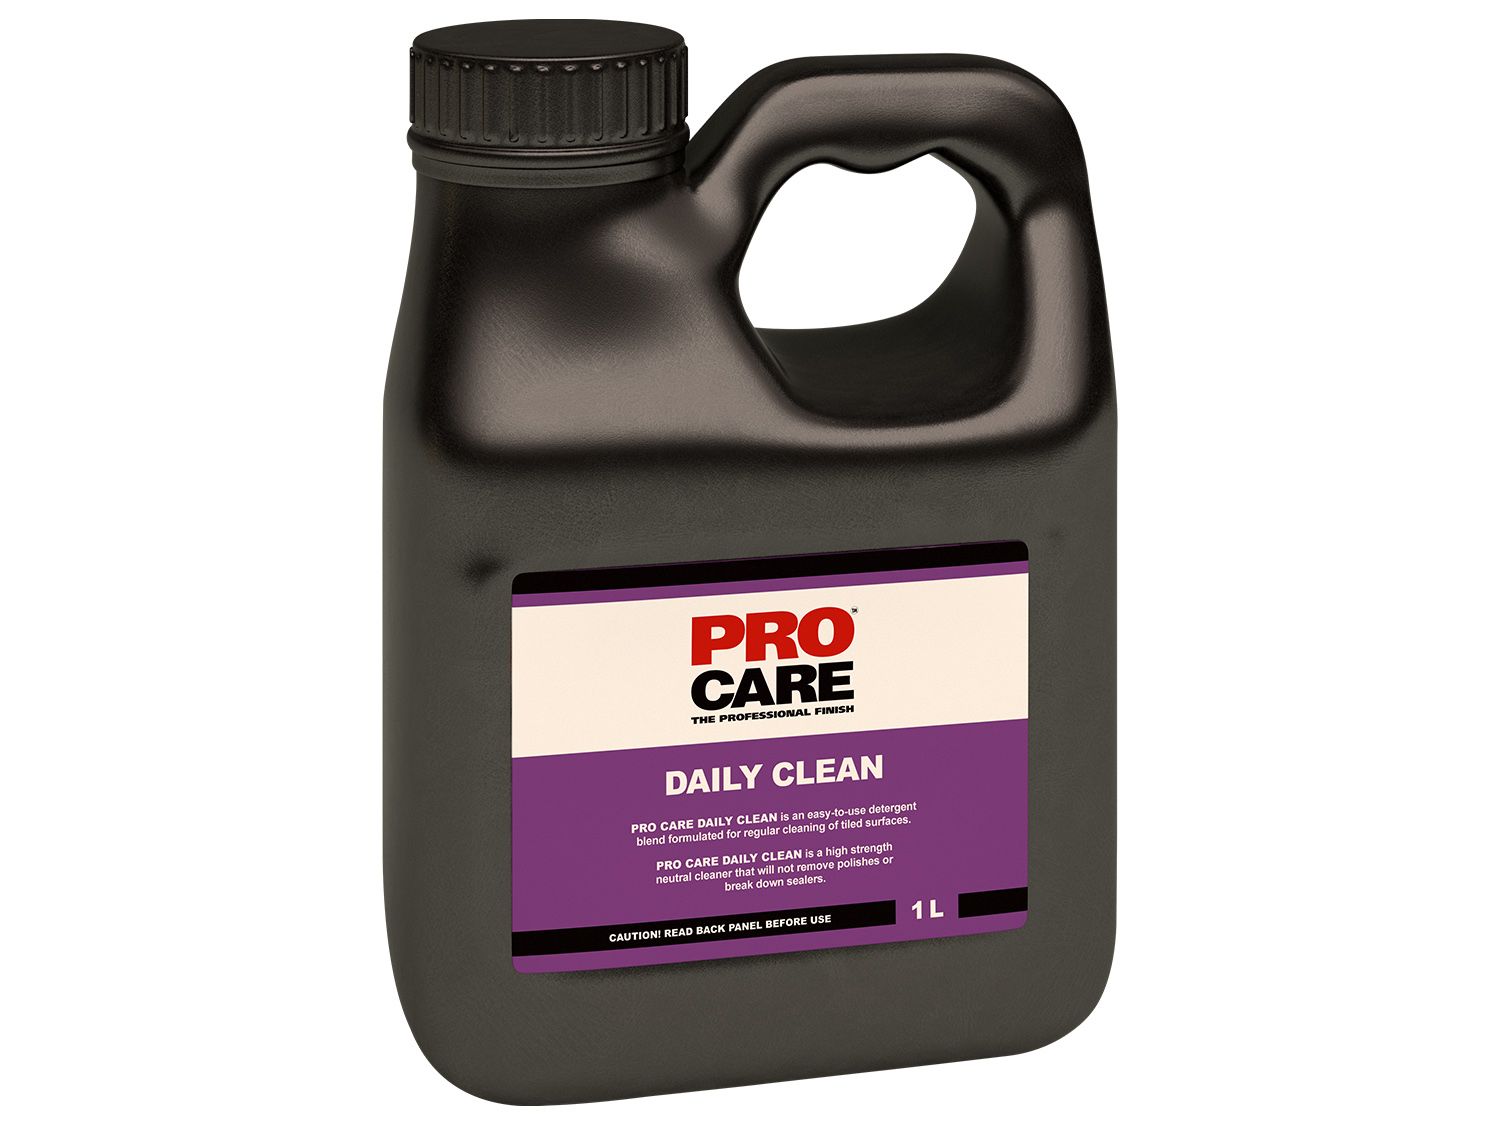 Pro Care Daily Litre